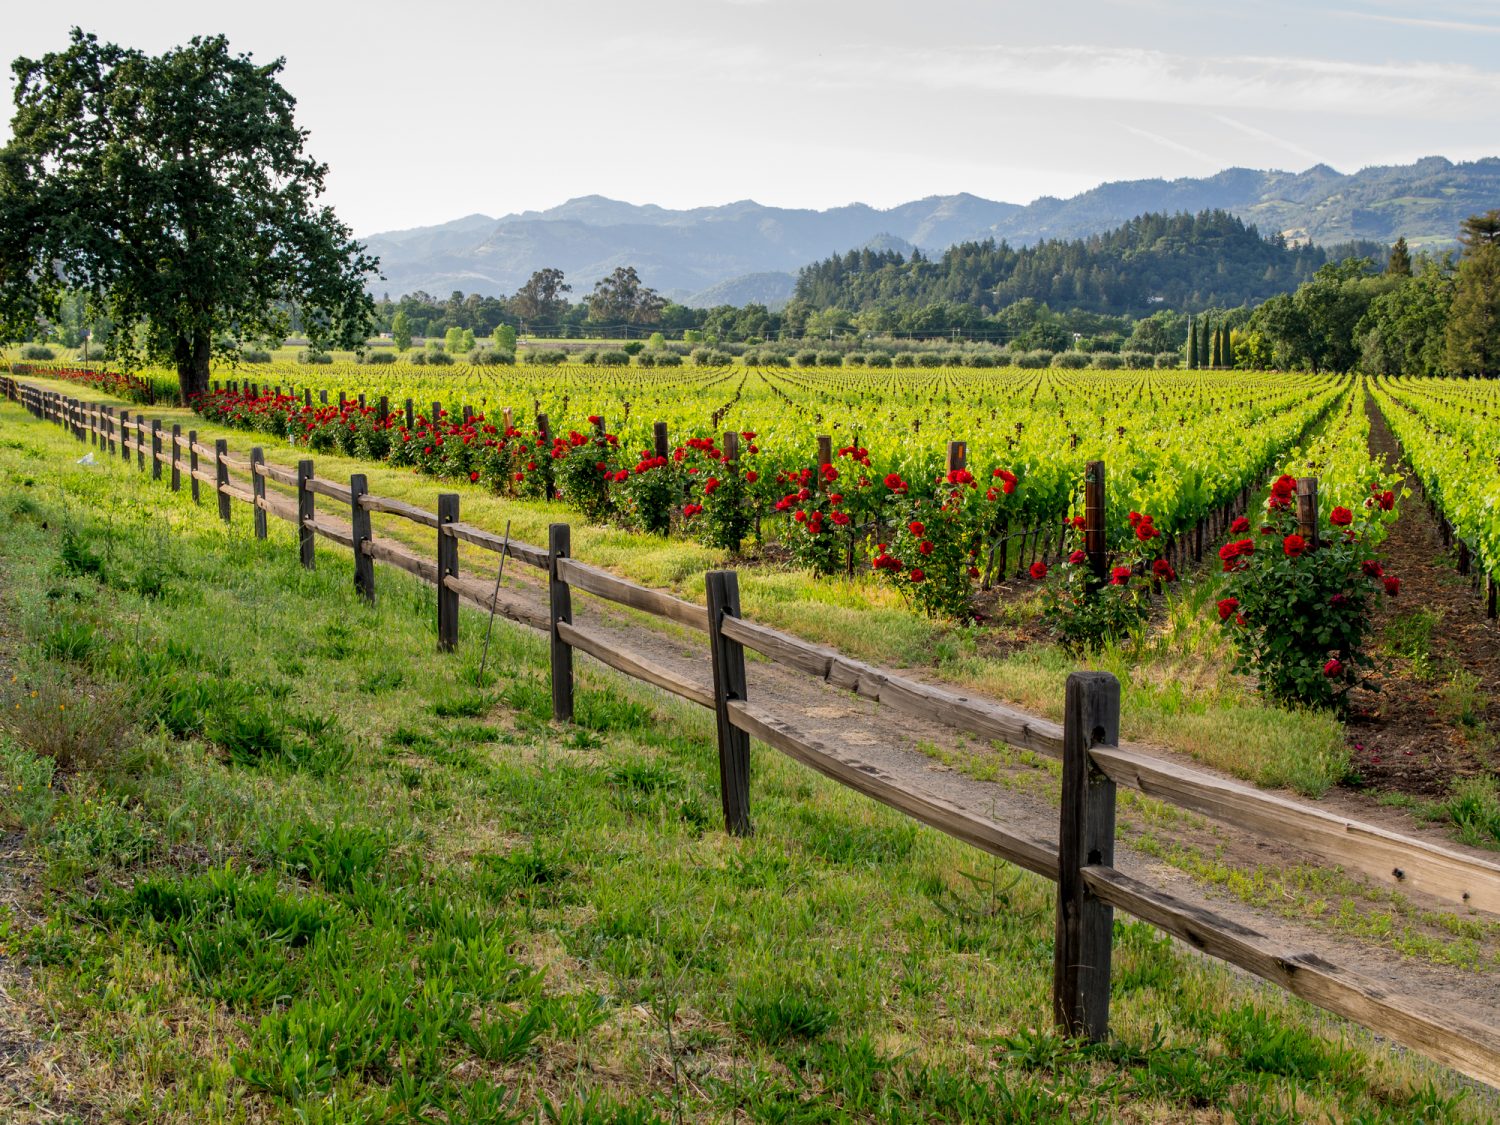 Visiting a scenic vineyard should be a part of all napa valley vacations